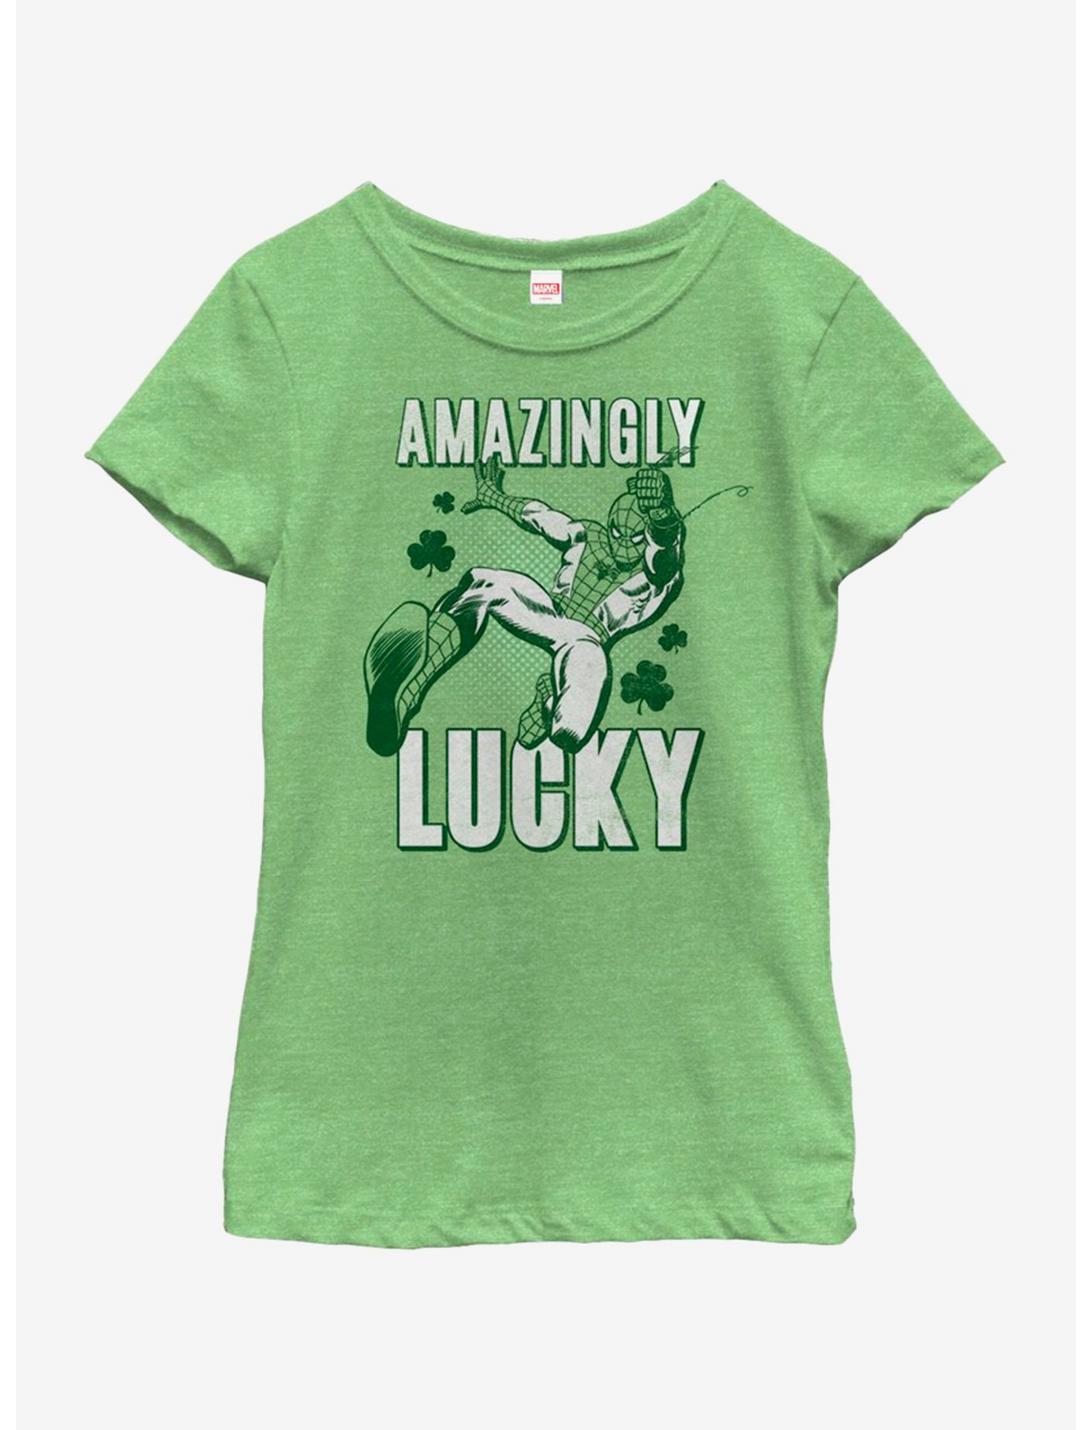 Marvel Spiderman Amazingly Lucky Youth Girls T-Shirt, GRN APPLE, hi-res